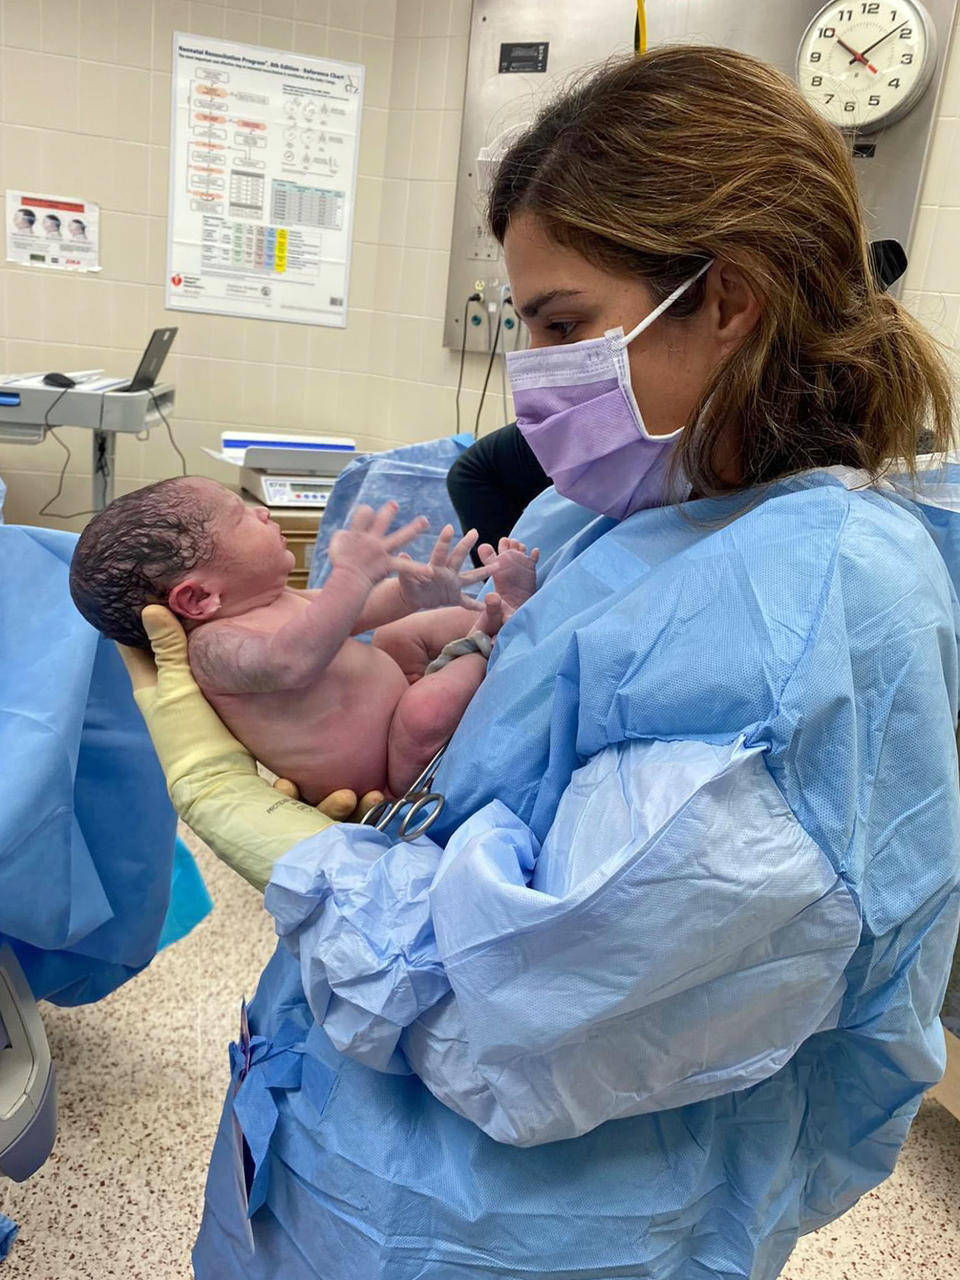 Dr. Zaskia Rodriguez, meeting a patient's newborn for the first time. (Dr. Zaskia Rodriguez)